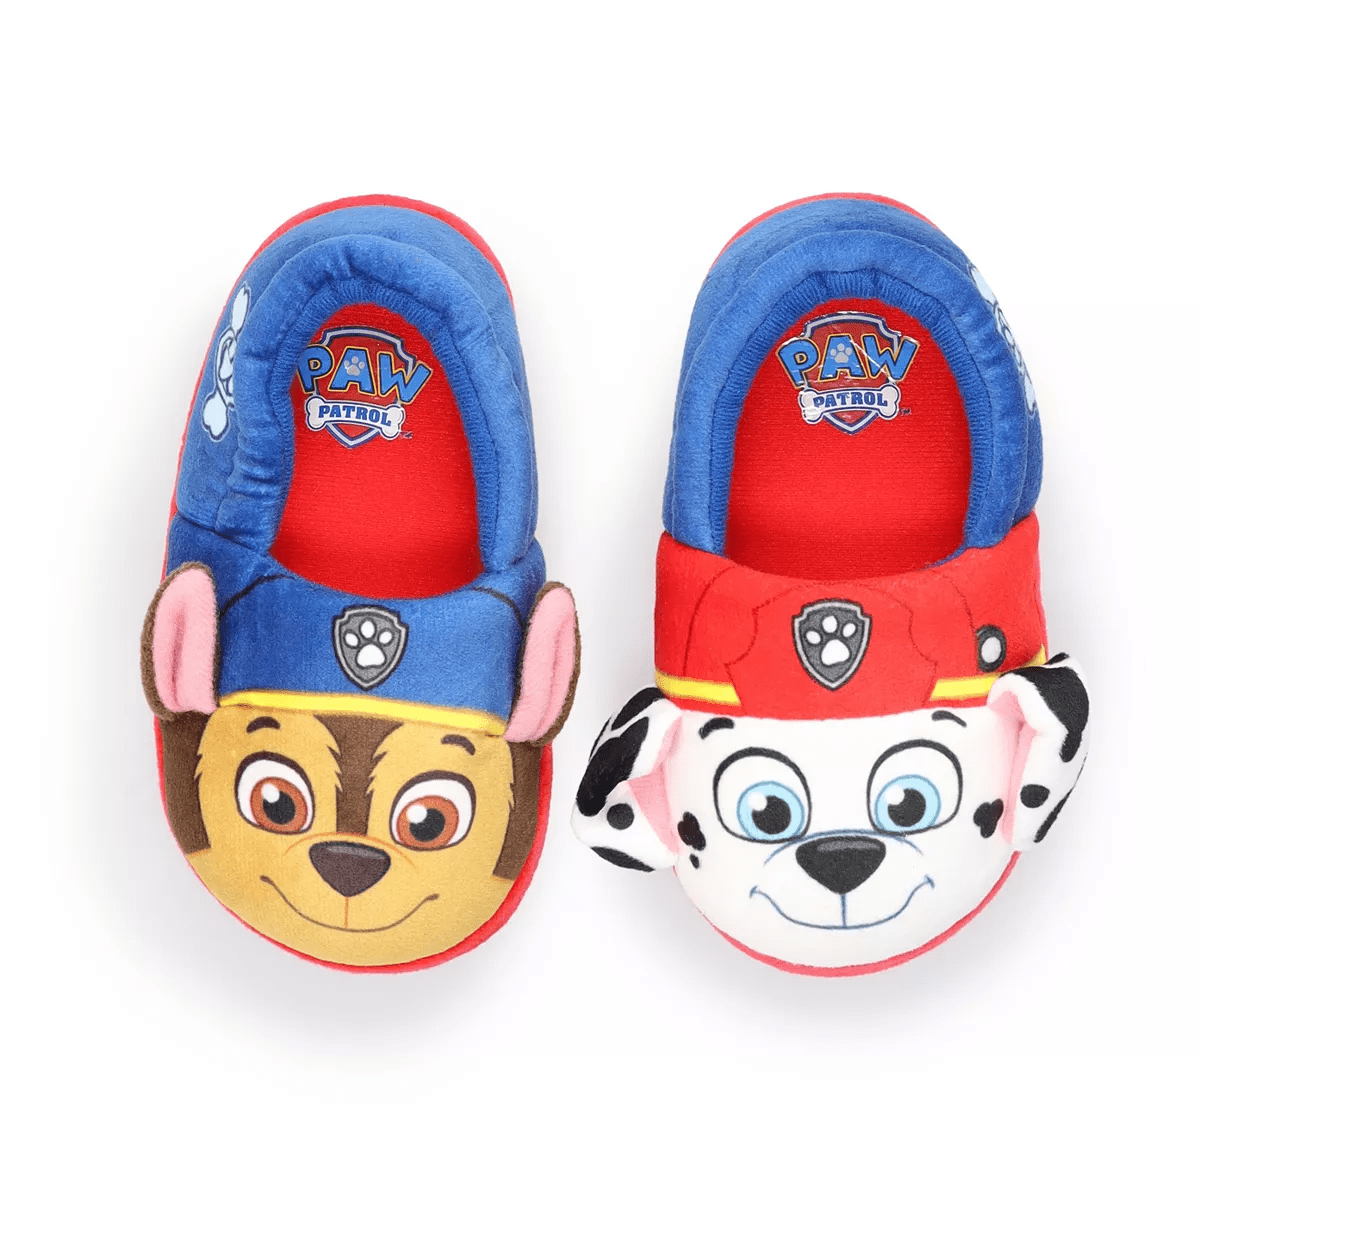 PAW Patrol Slippers for Toddler Boys feat Chase and Marshall 